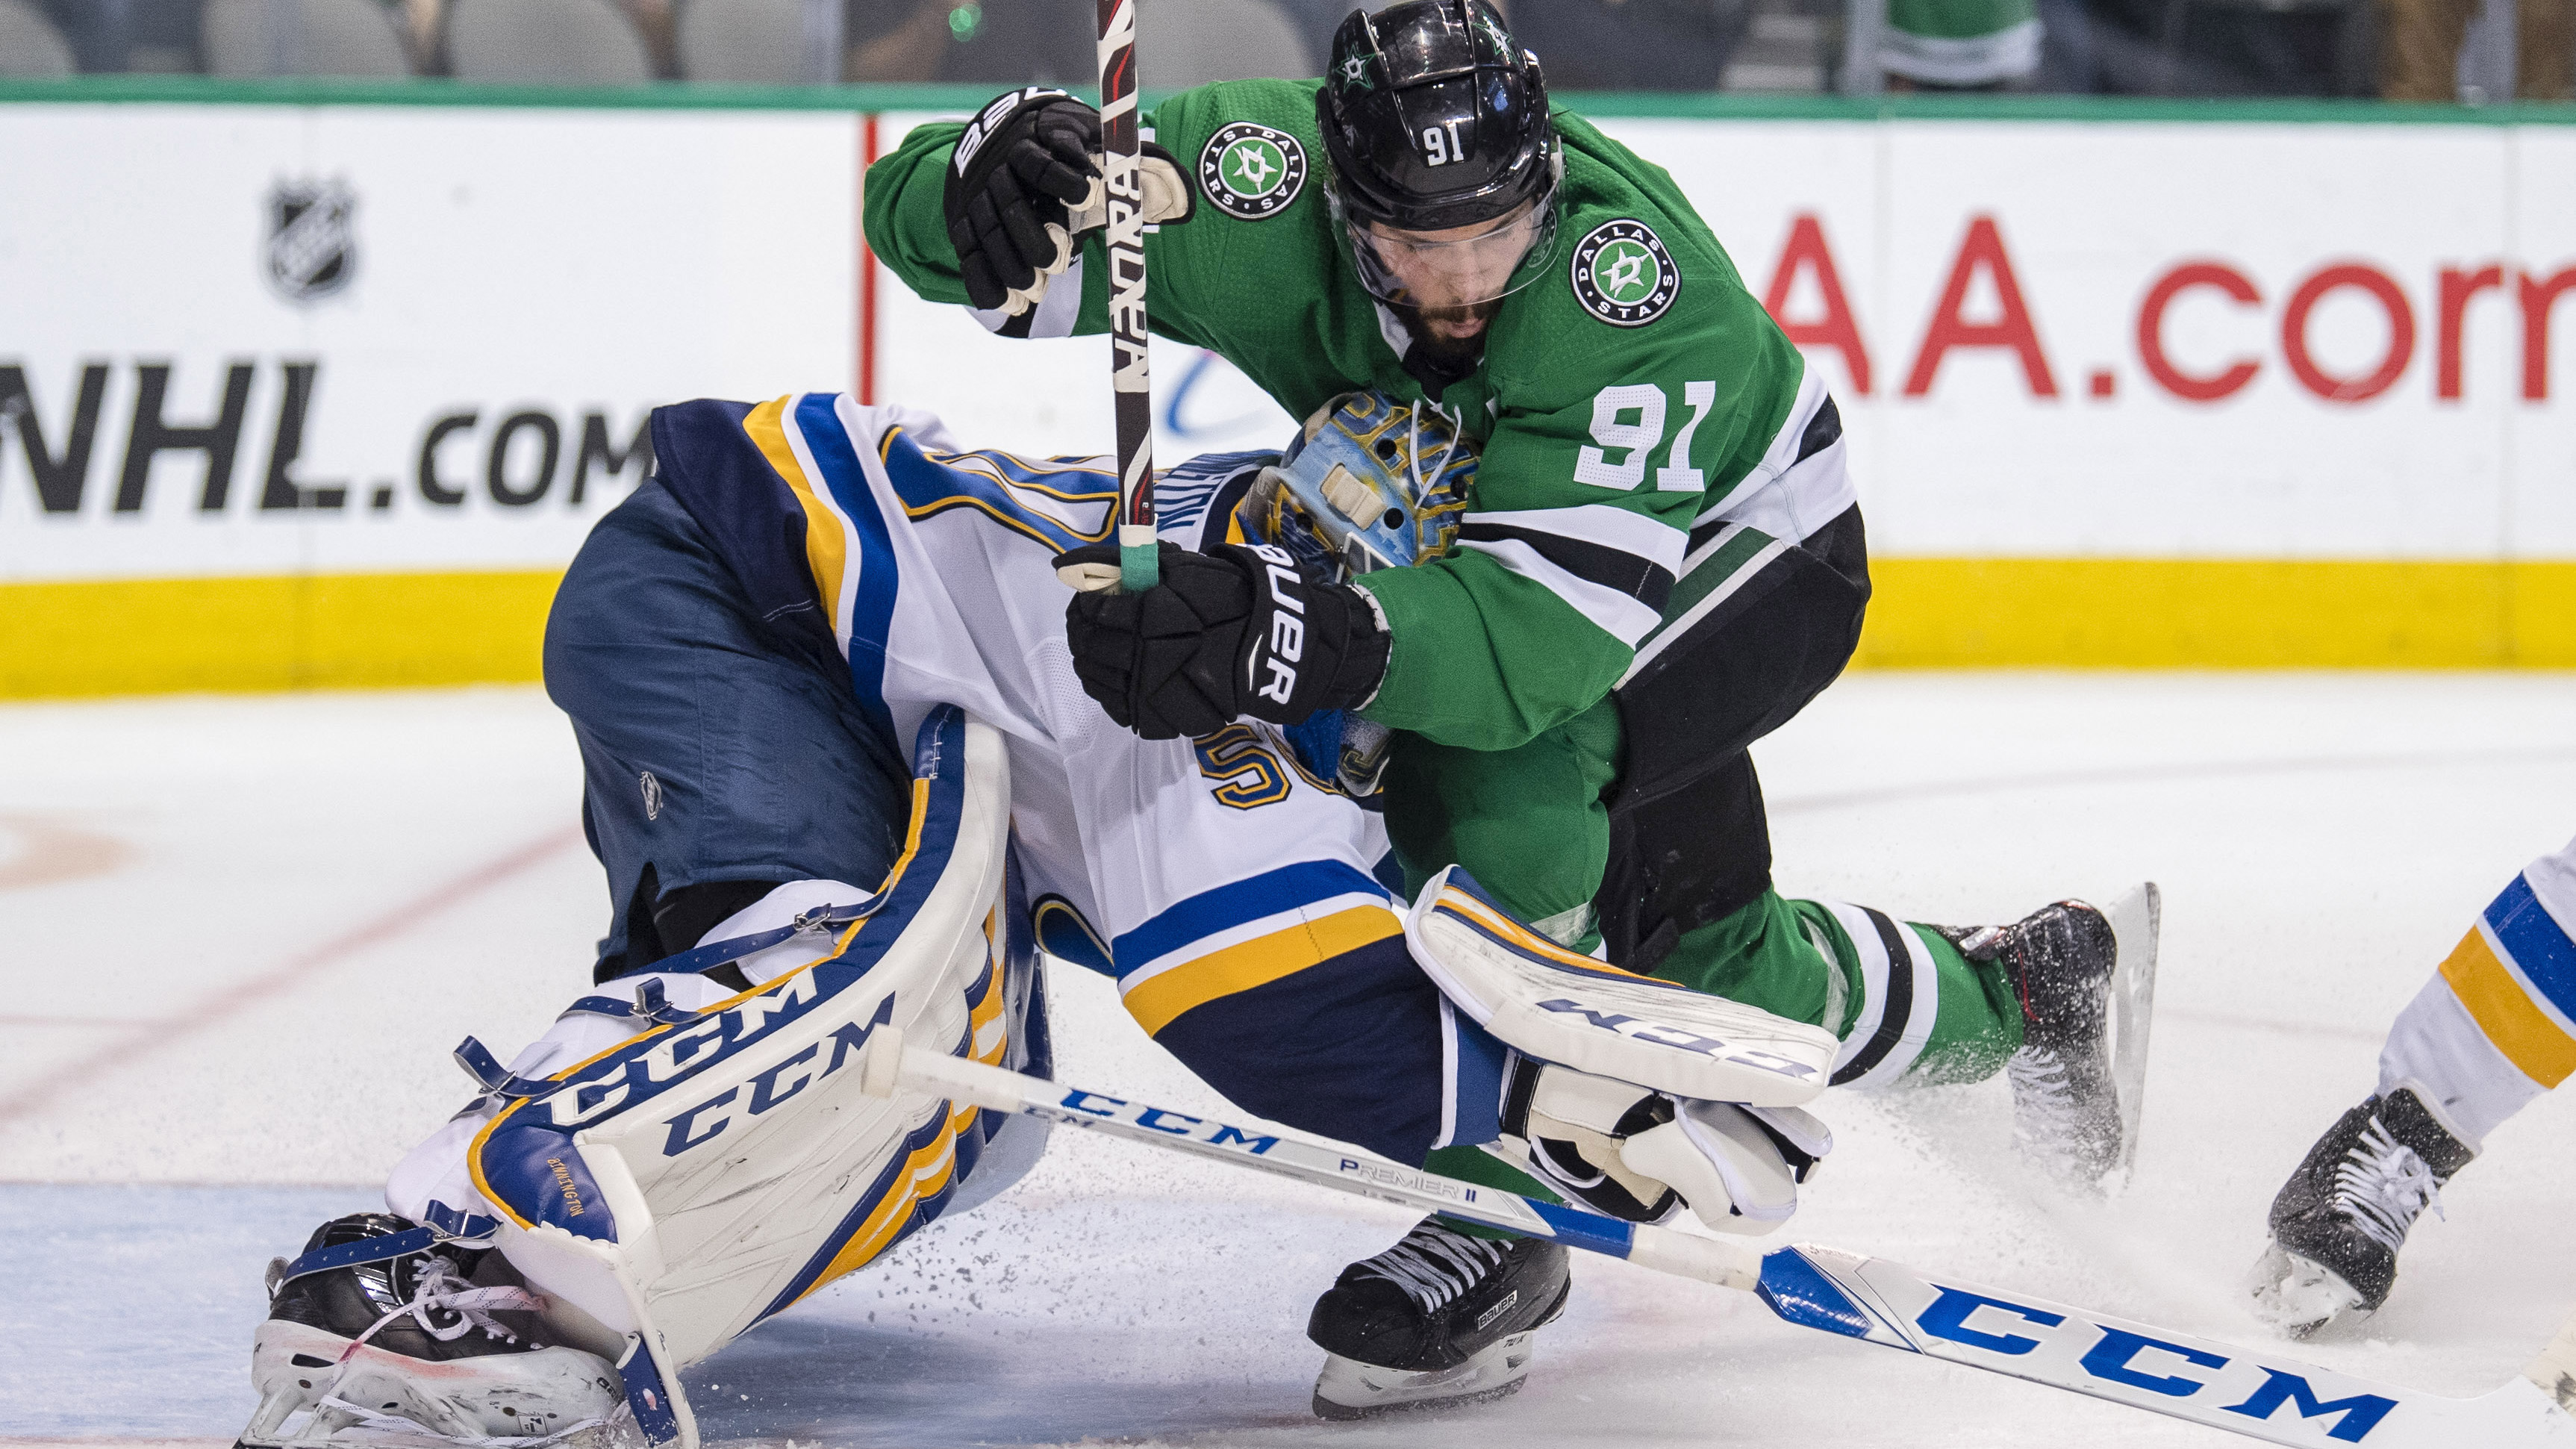 Blues lose chippy game to Stars 4-2, series tied at 2-2